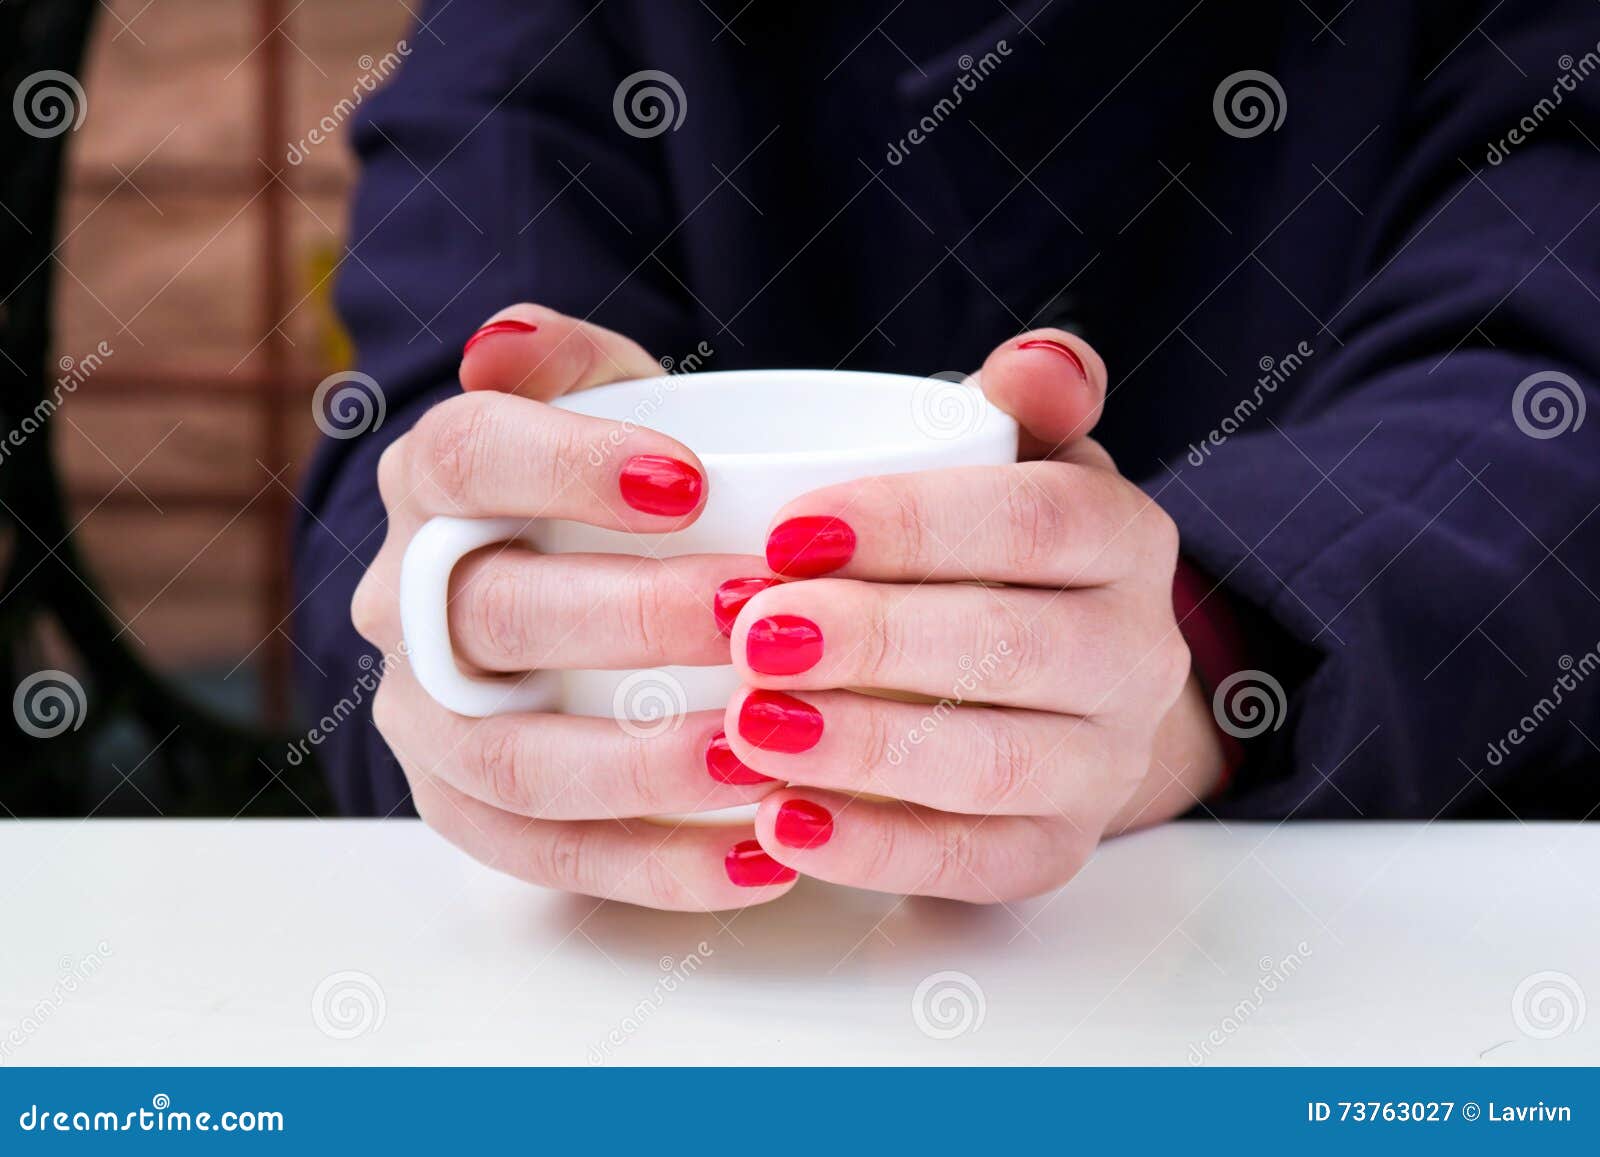 woman with red nail polish holding white cup in a cafee